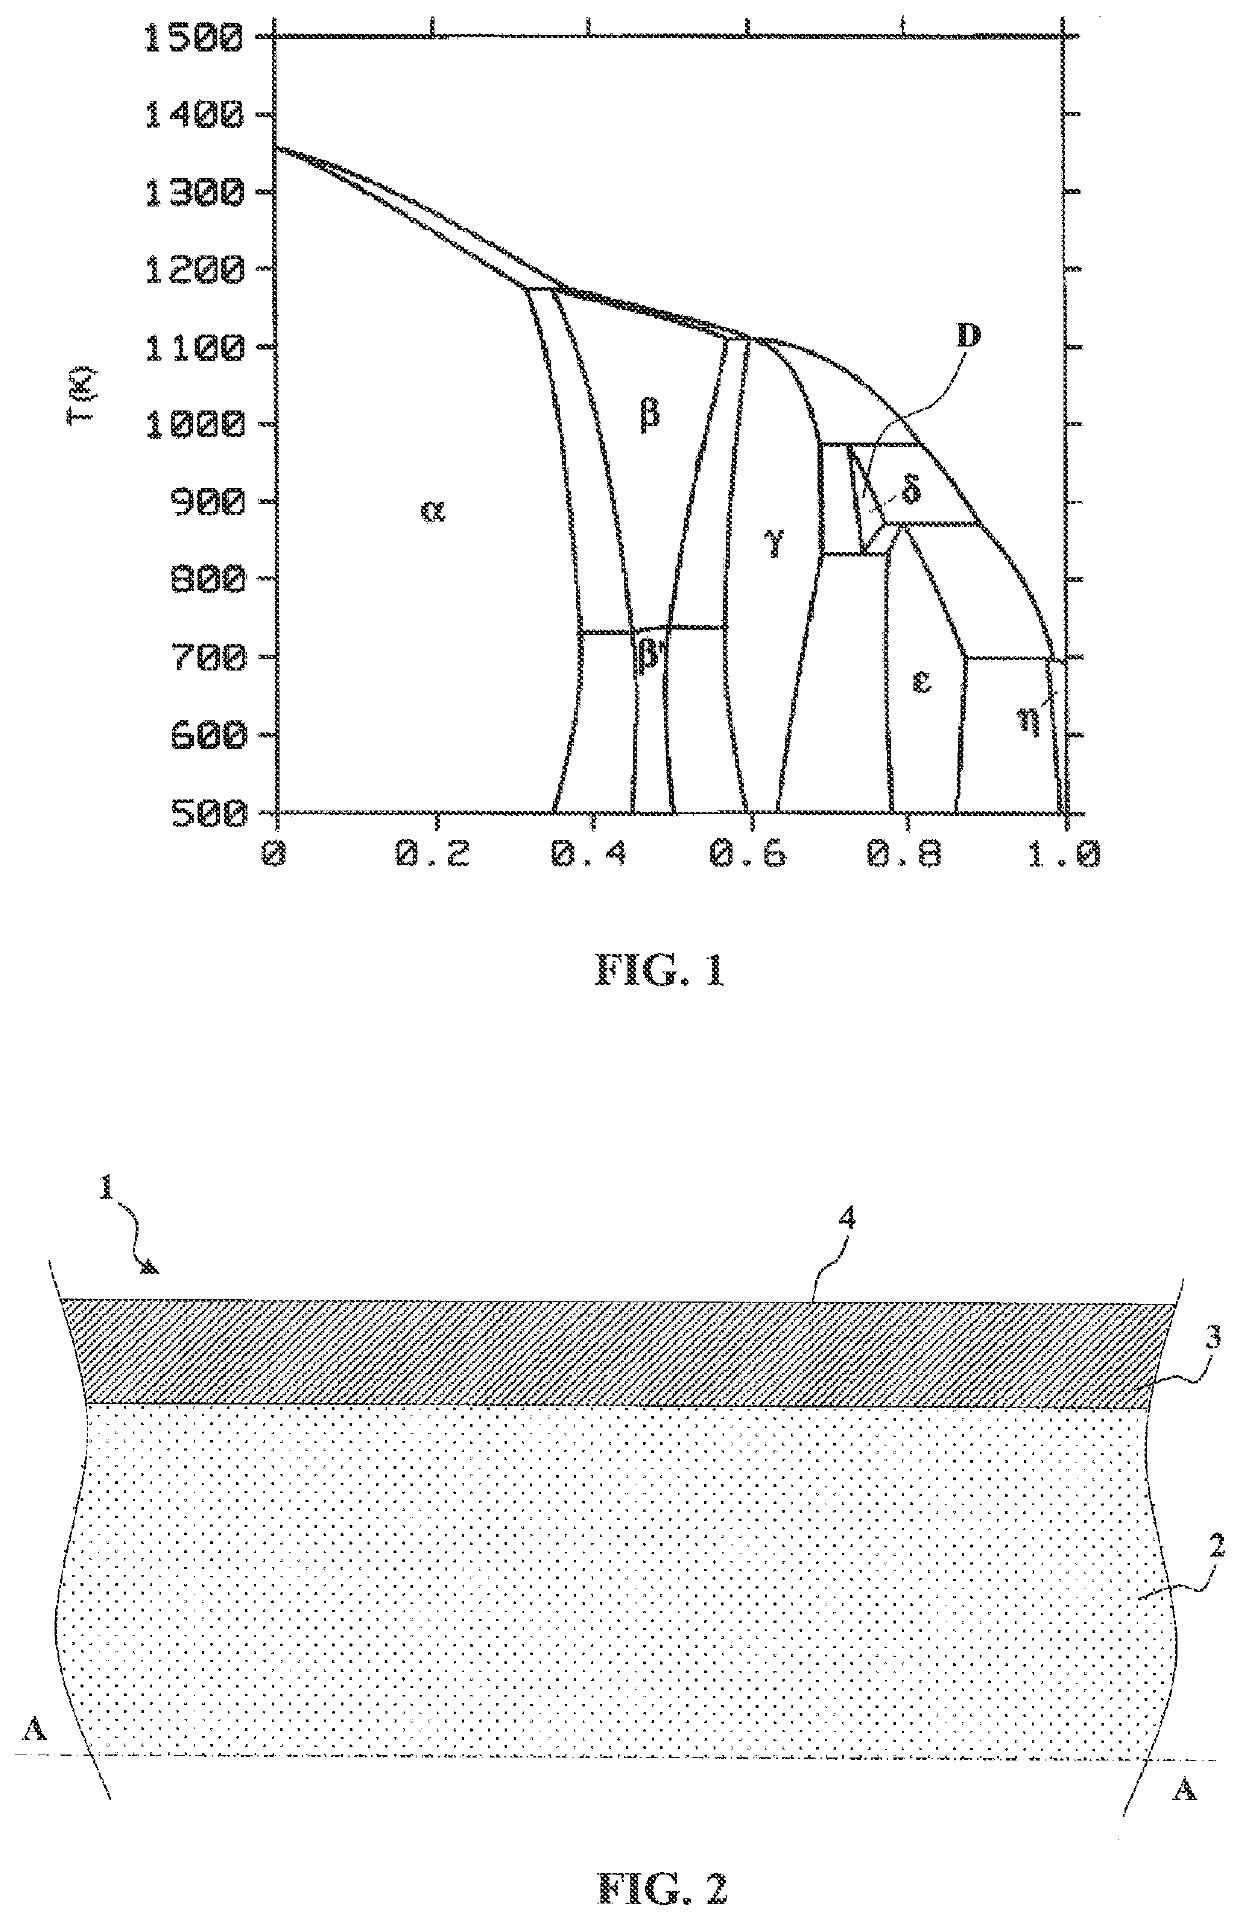 Delta-phase brass electrode wire for electroerosion machining, and method for manufacturing same